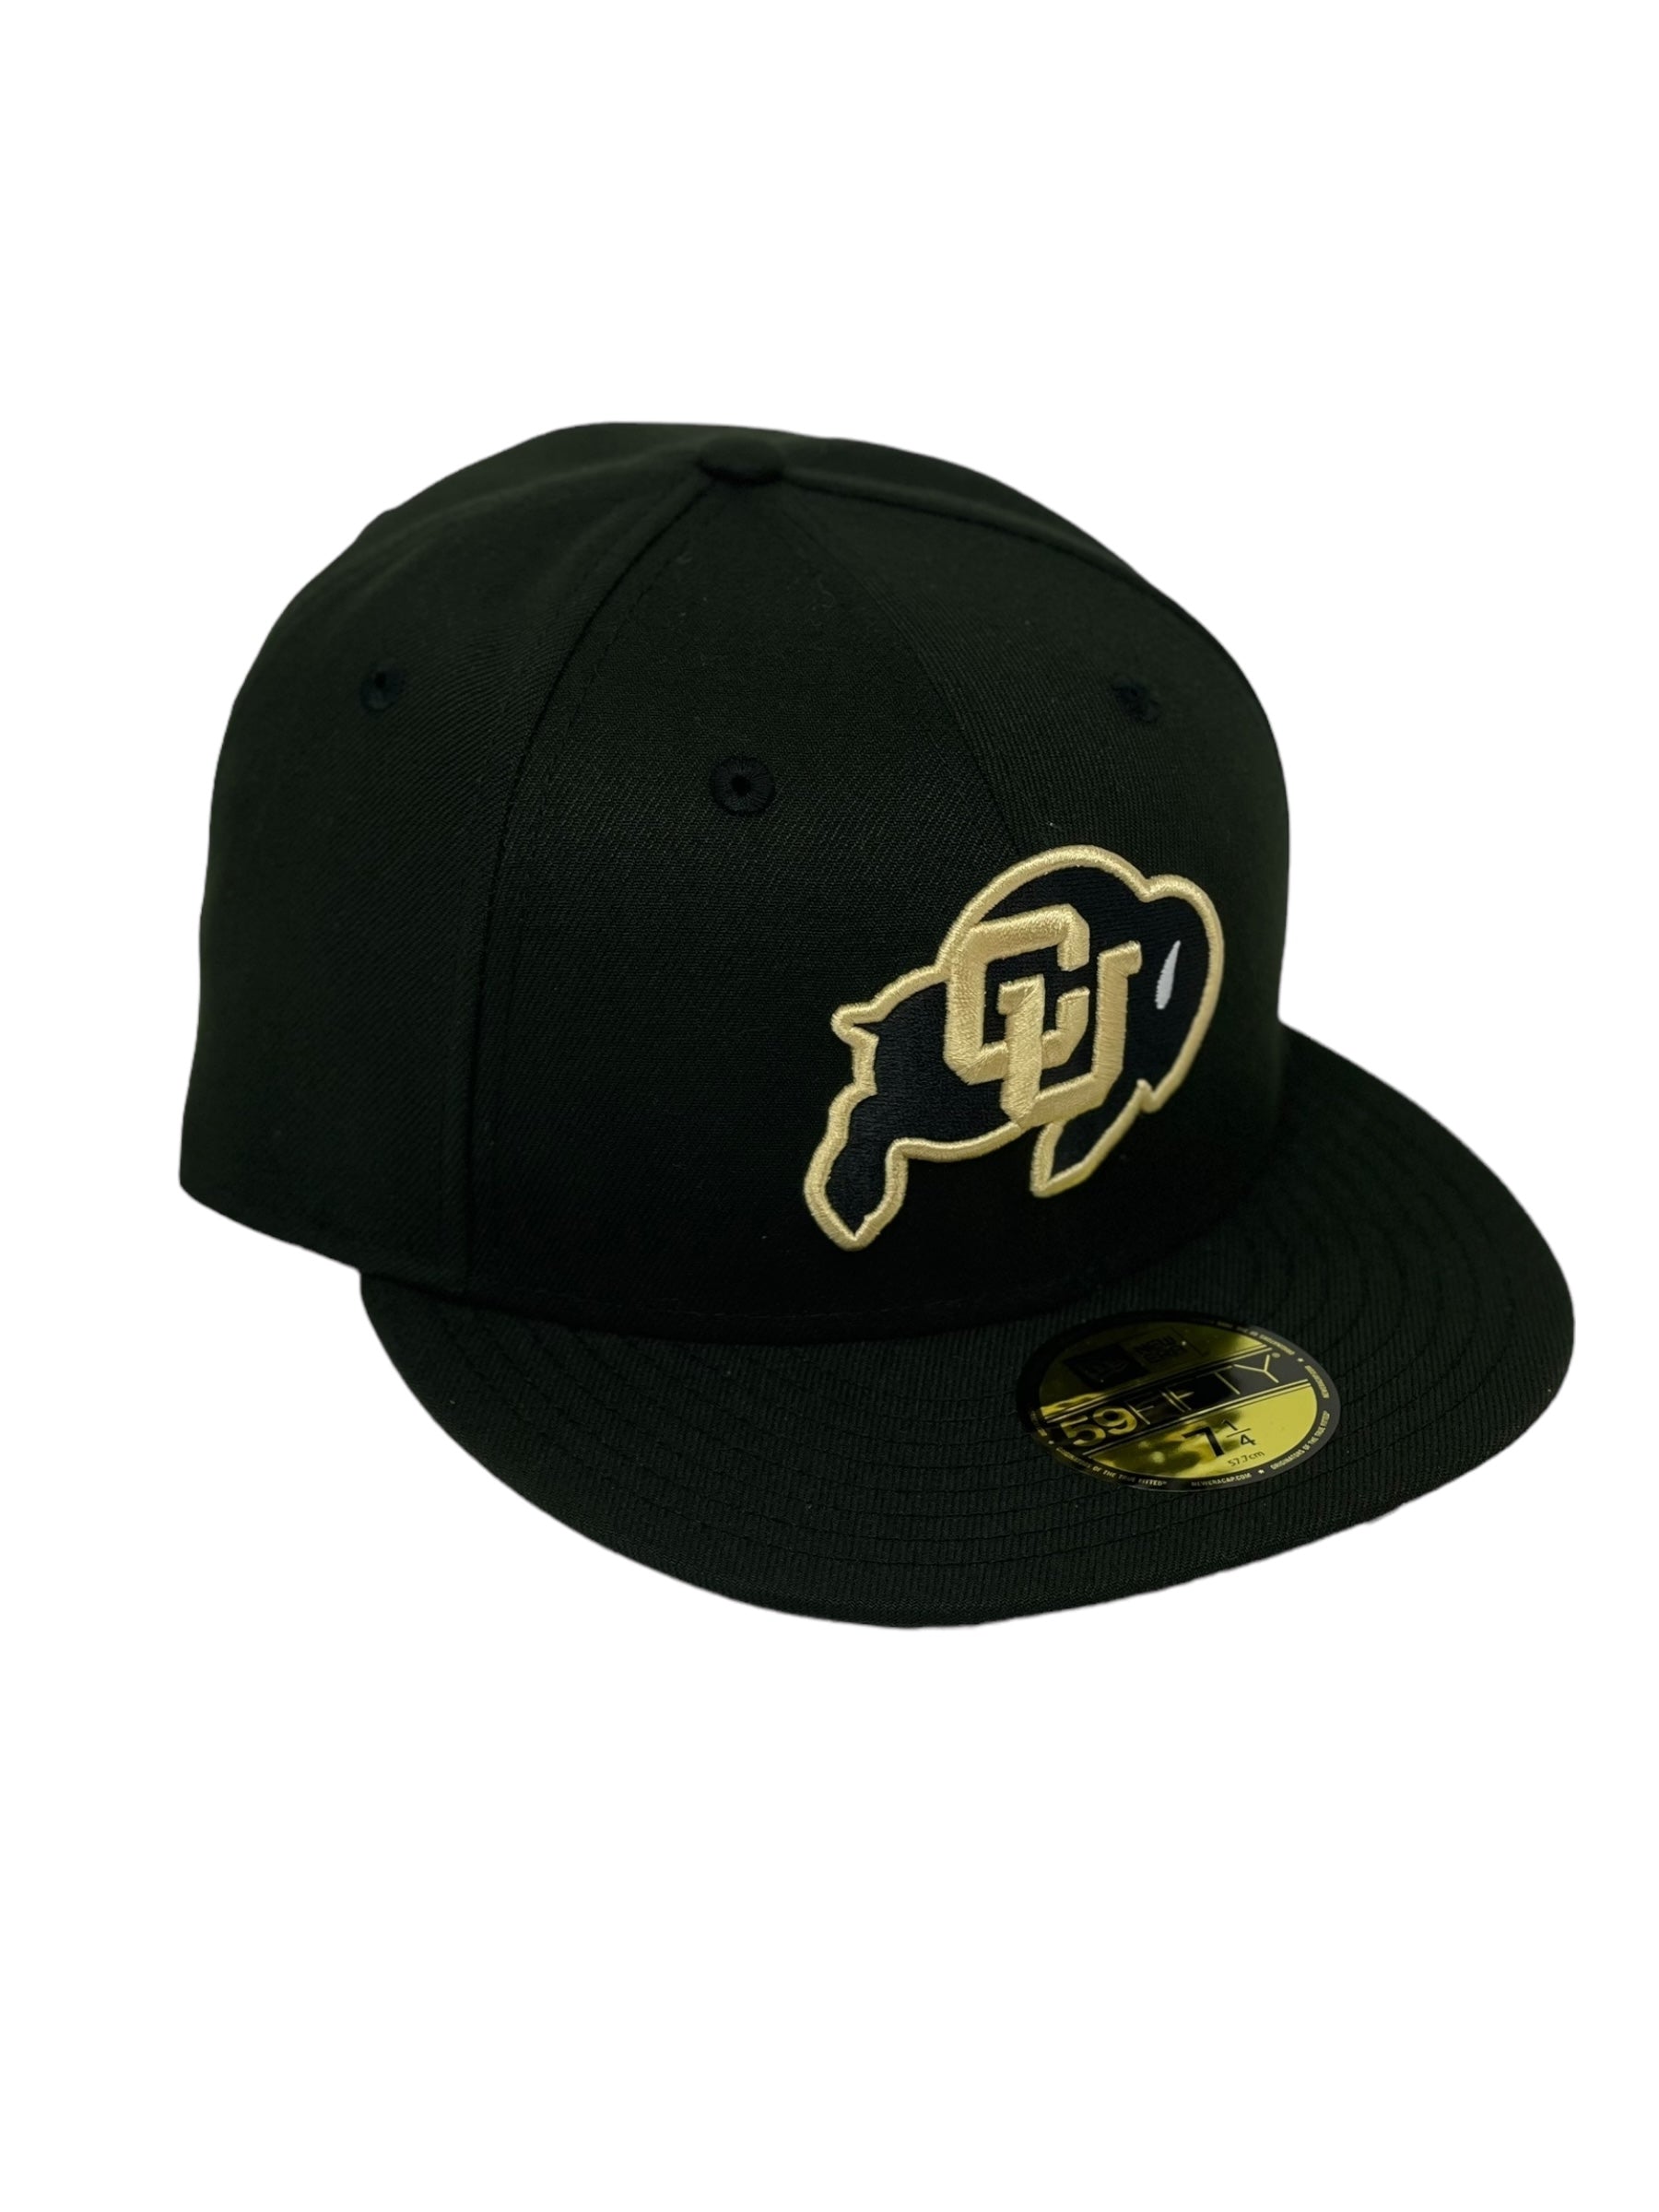 COLORADO BUFFALOES (BLACK) NEW ERA 59FIFTY FITTED